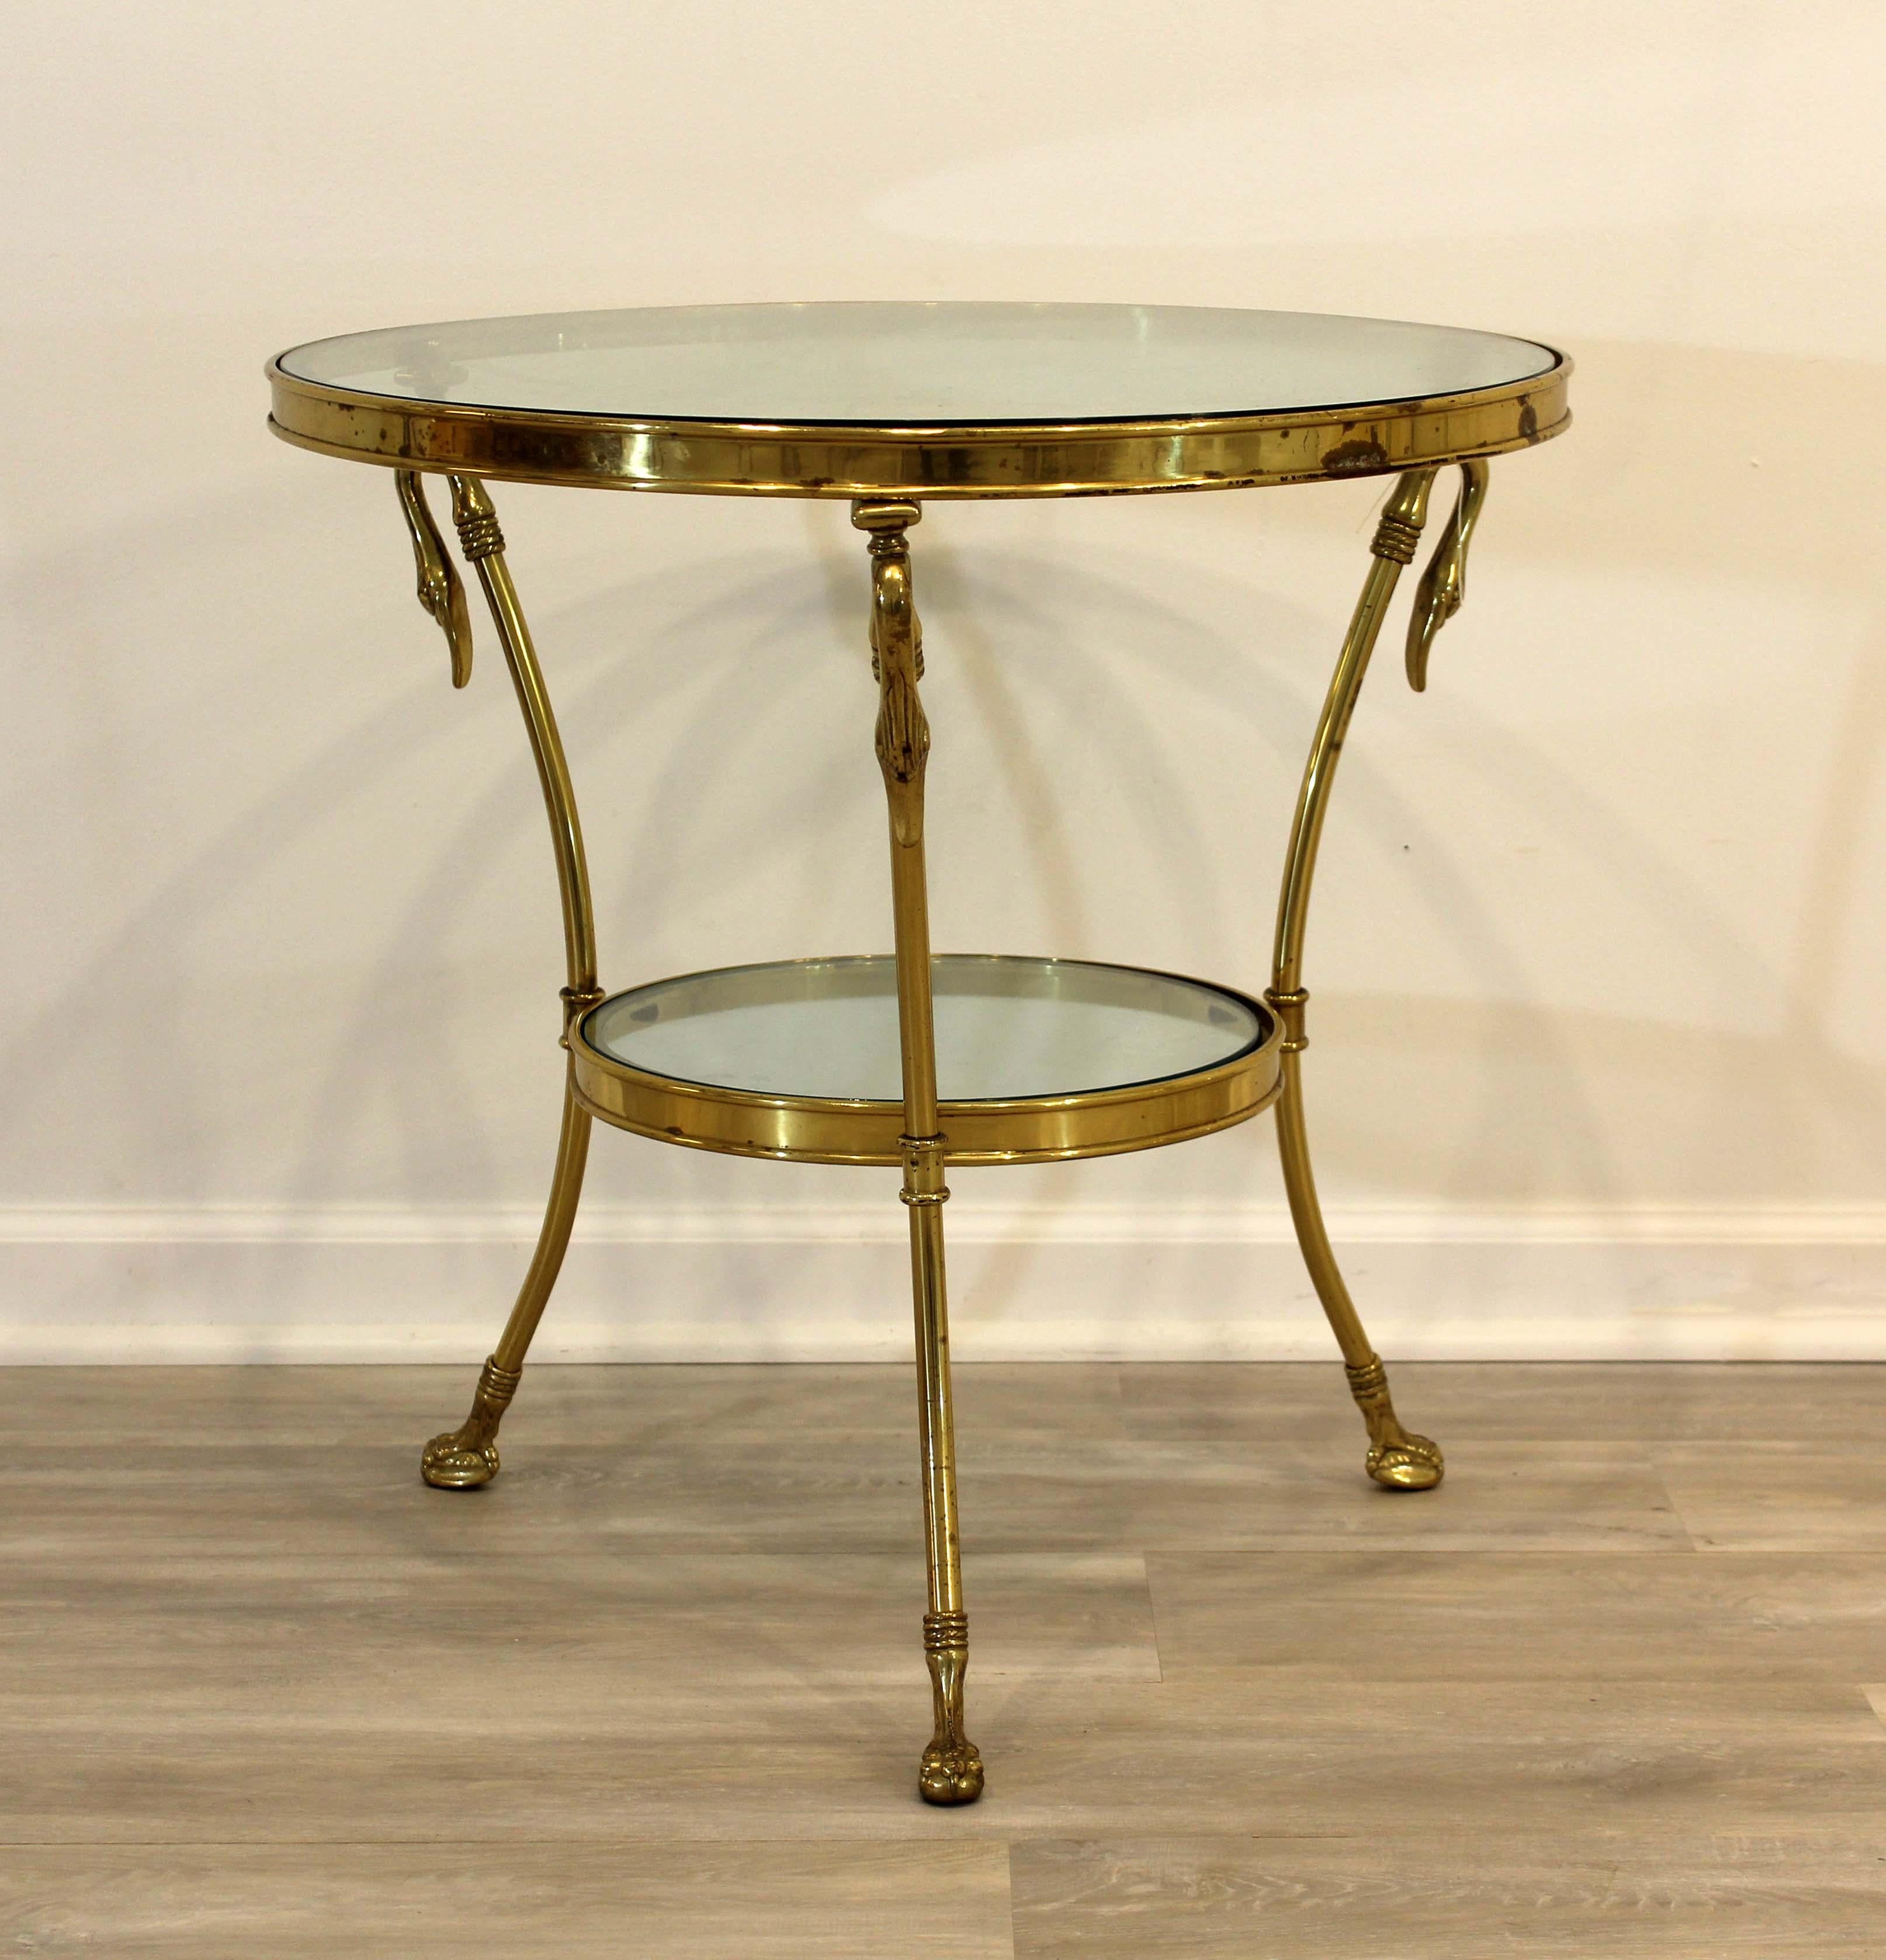 This vintage brass, tri-legged side or occasional table from Maison Jansen is detailed with goose/duck heads with corresponding feet while two tiers of glass offer extra storage display space.

This piece is in good condition with some pitting and